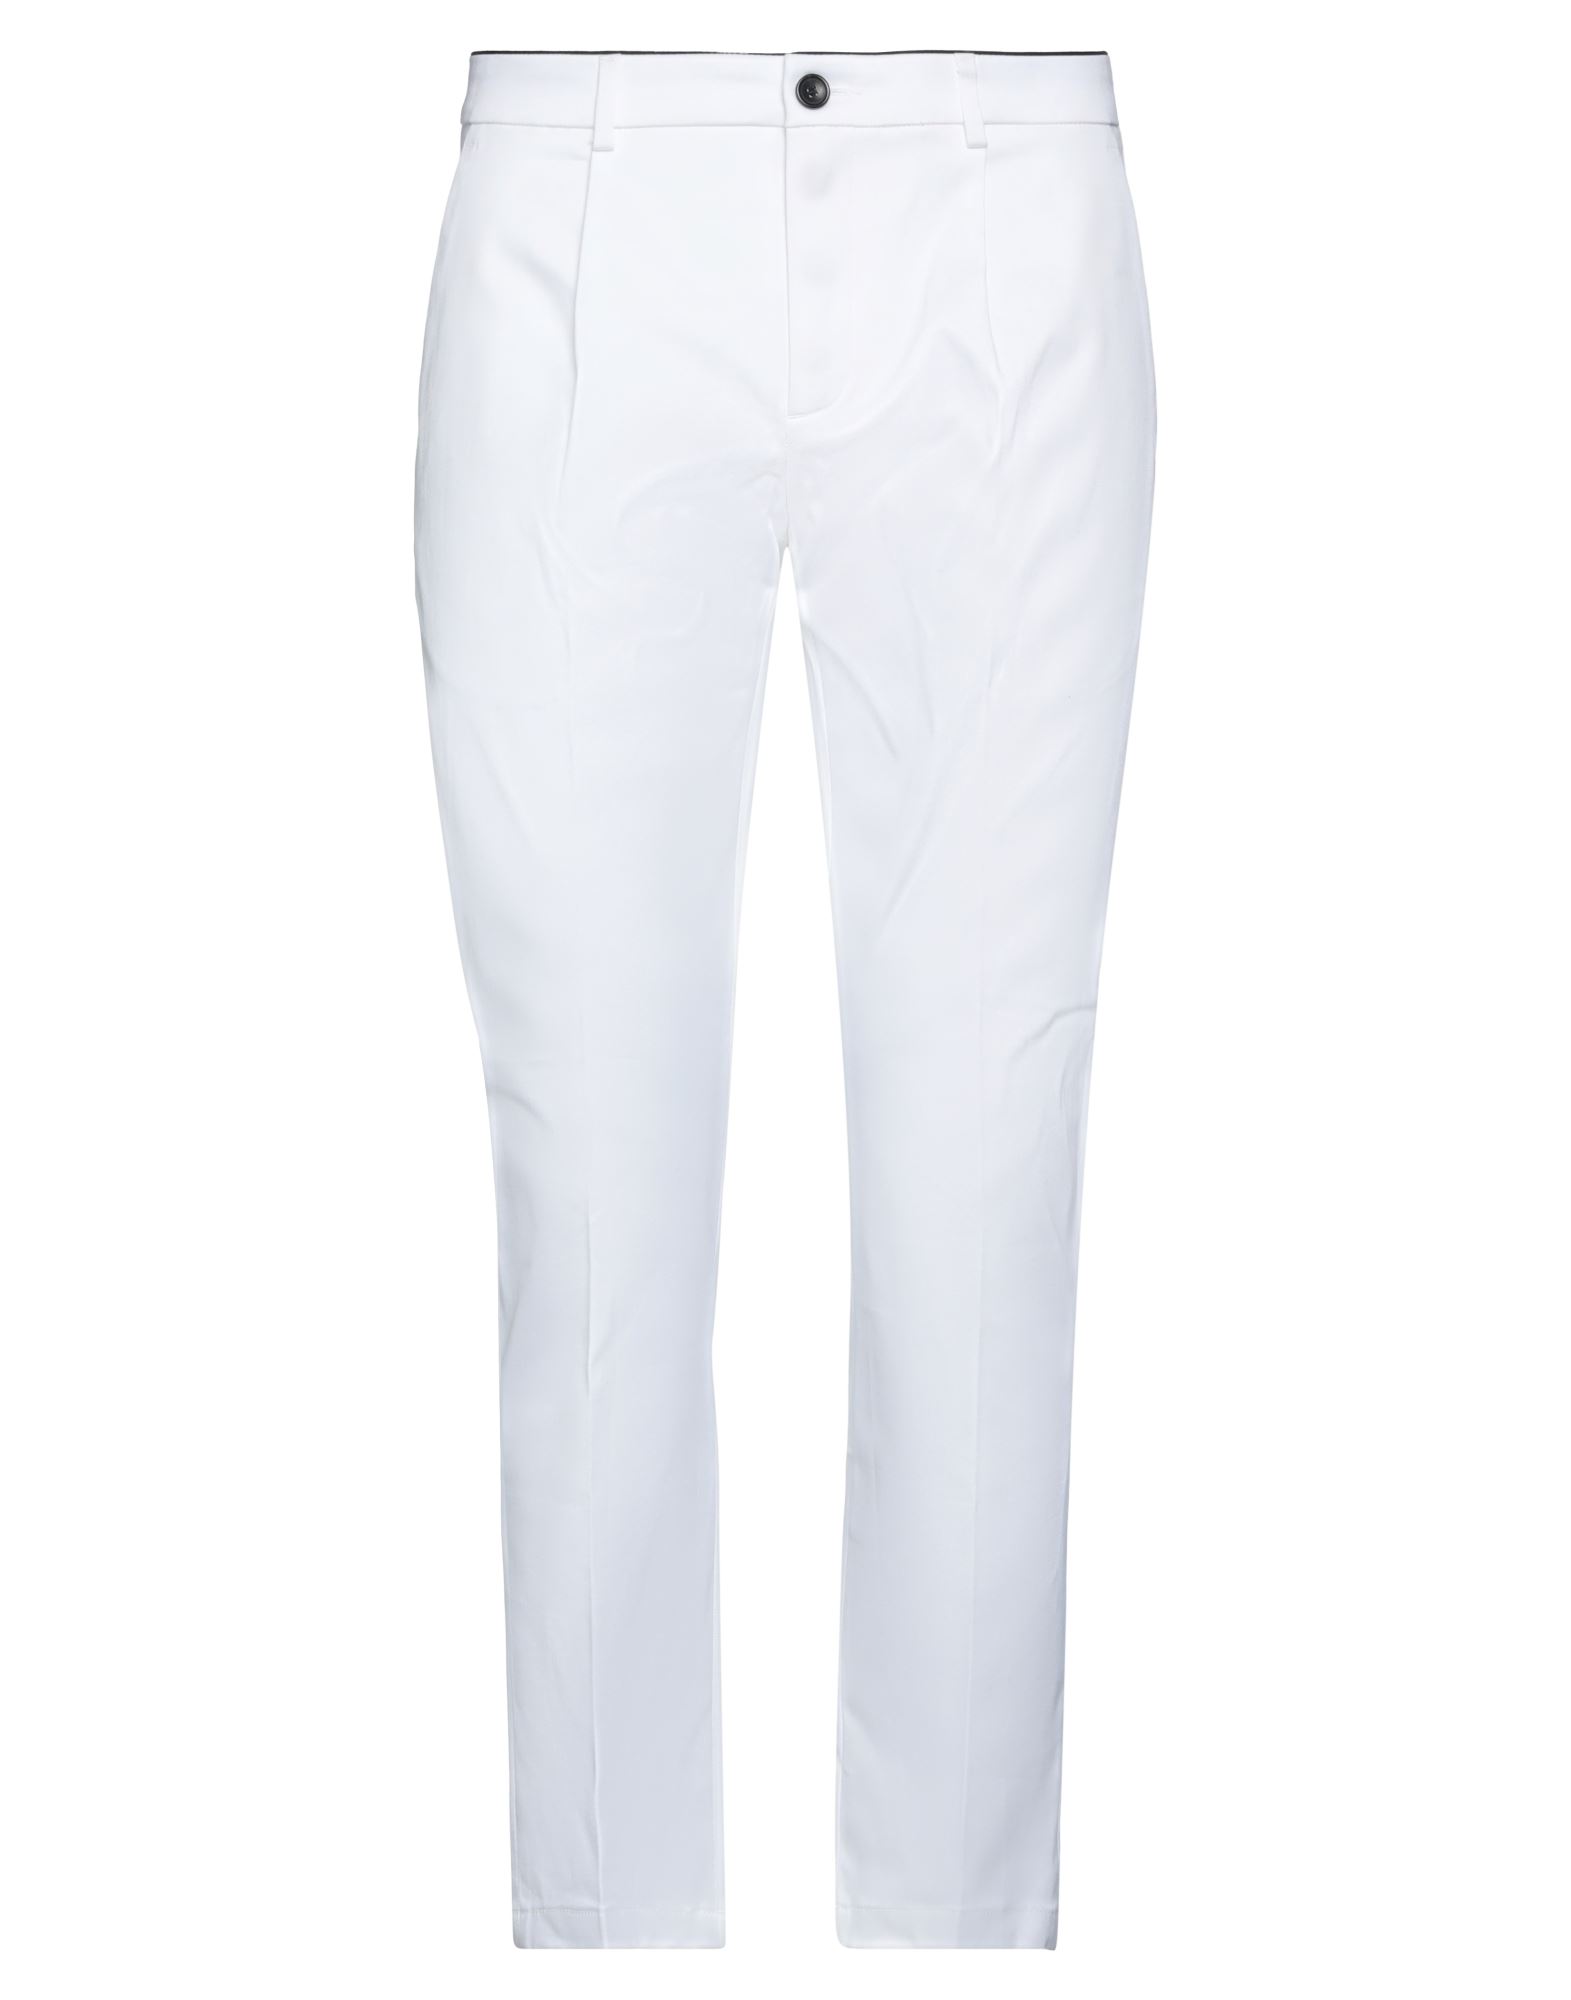 Department 5 Pants In White